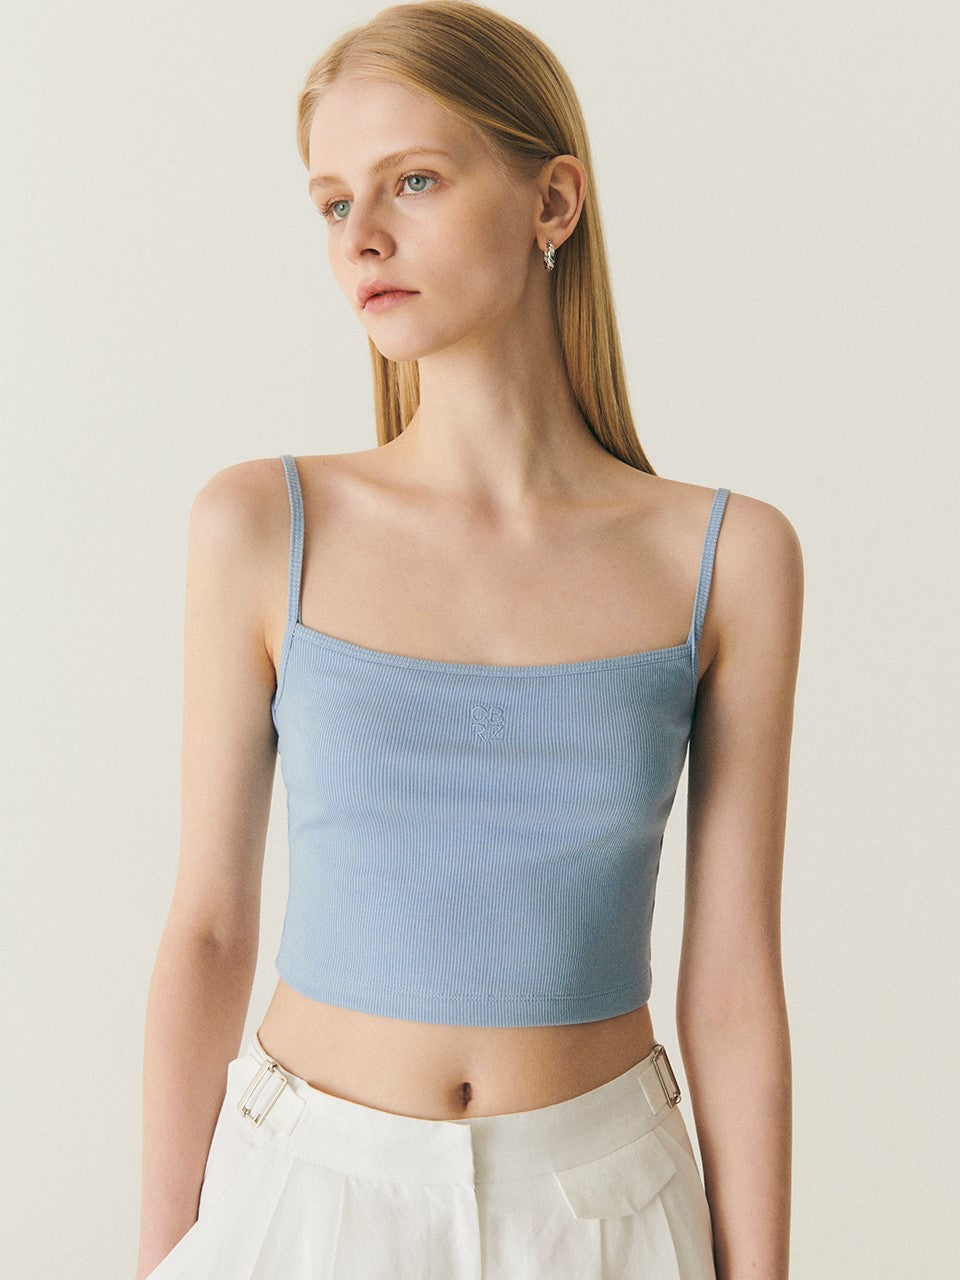 CITYBREEZE Embroidered Logo Top Blue (NewJeans Hanni's pick)